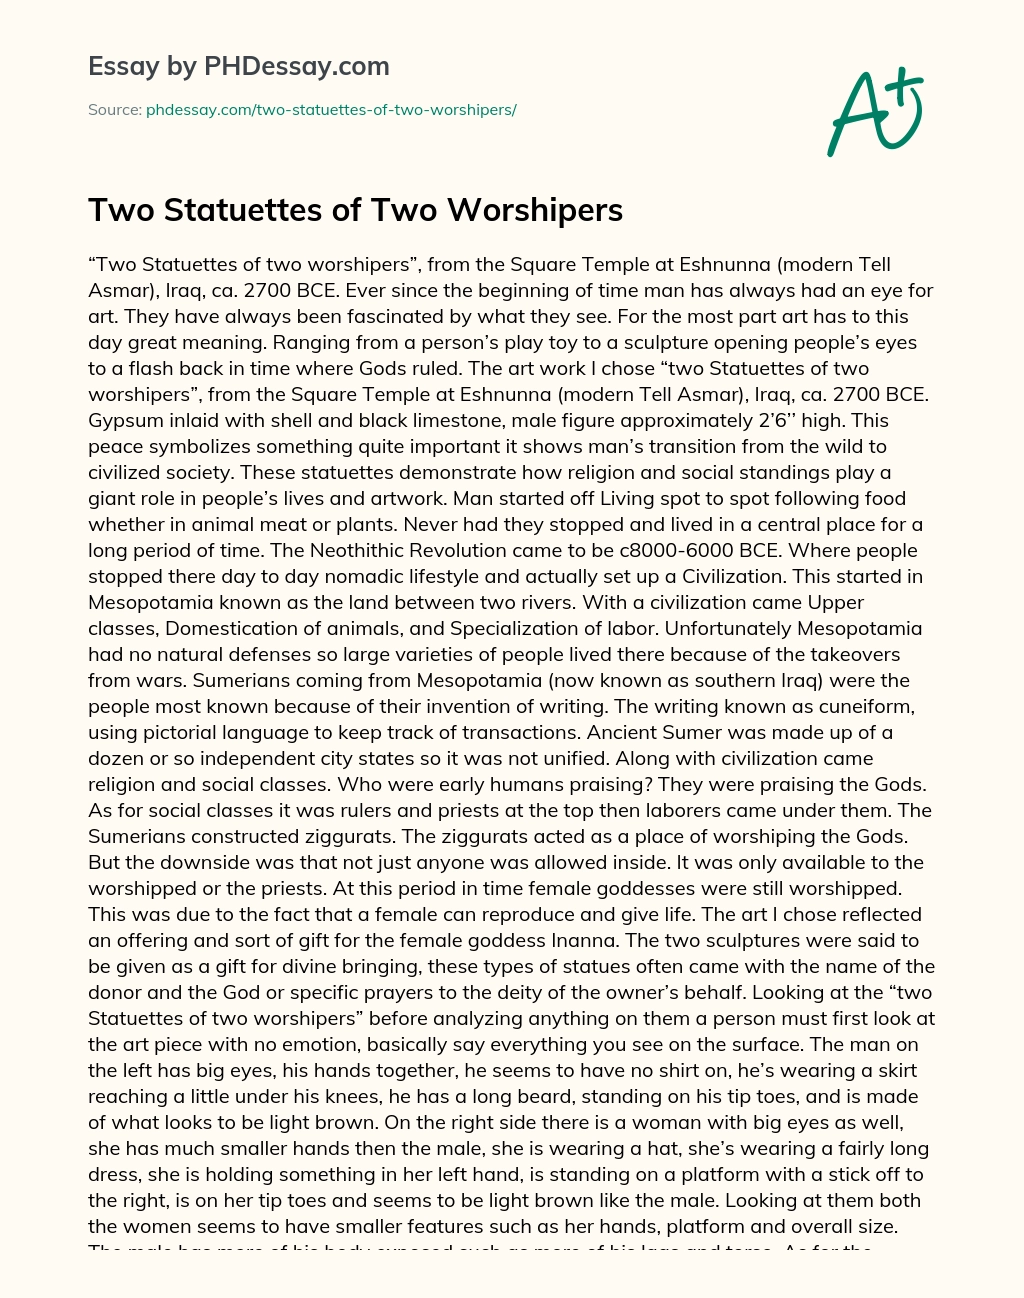 Two Statuettes of Two Worshipers essay